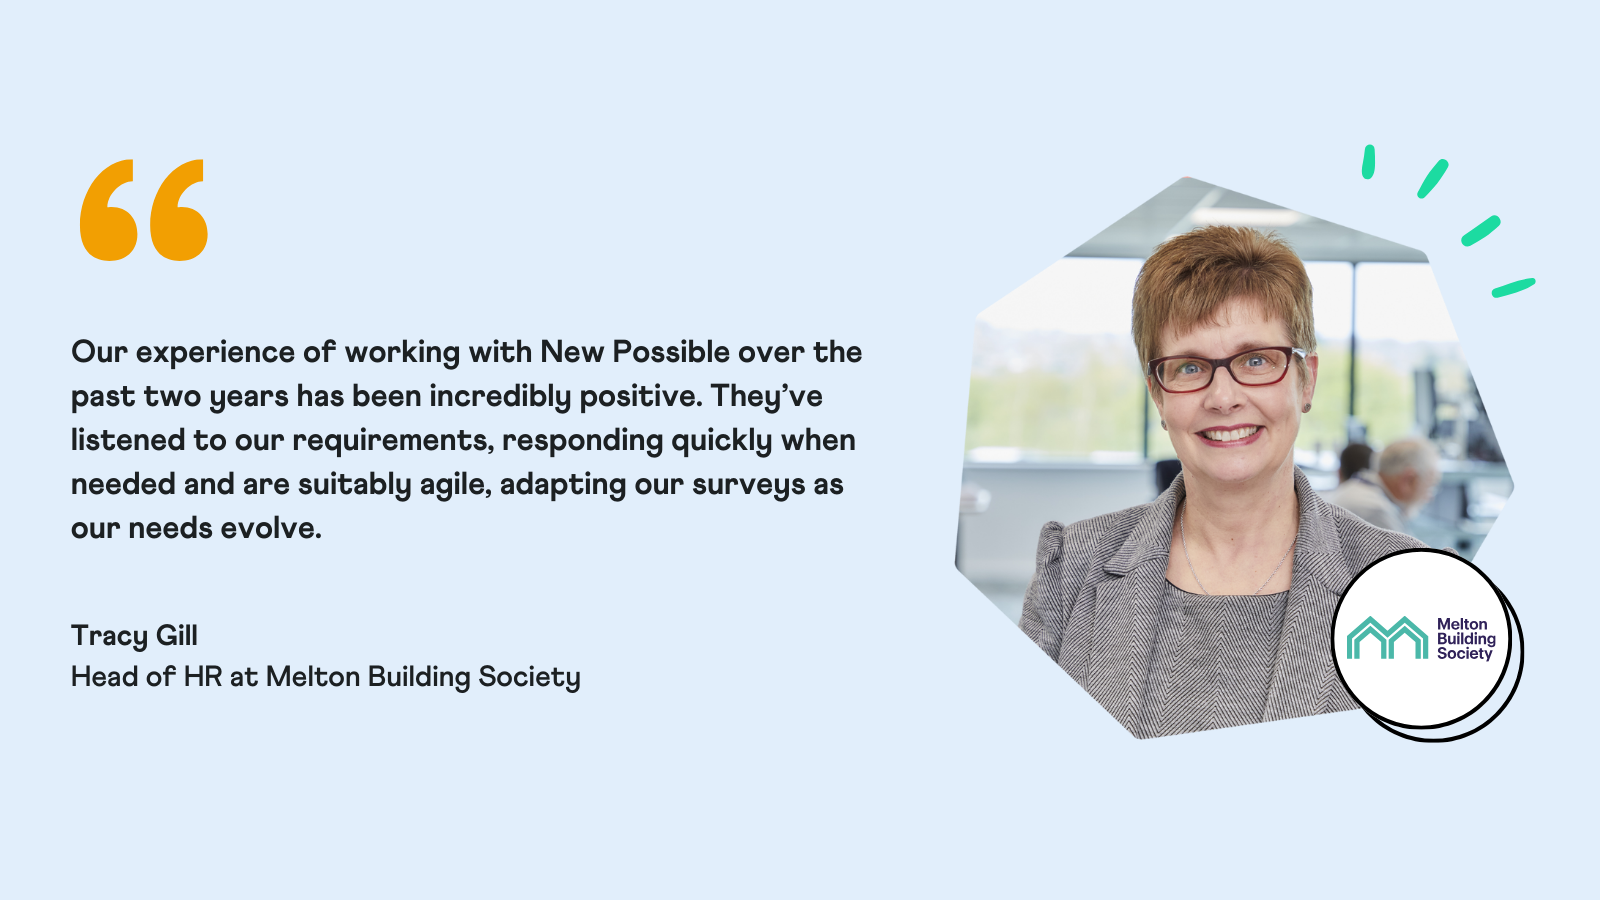 New Possible - Tracy Gill - Melton Building Society - Testimonial